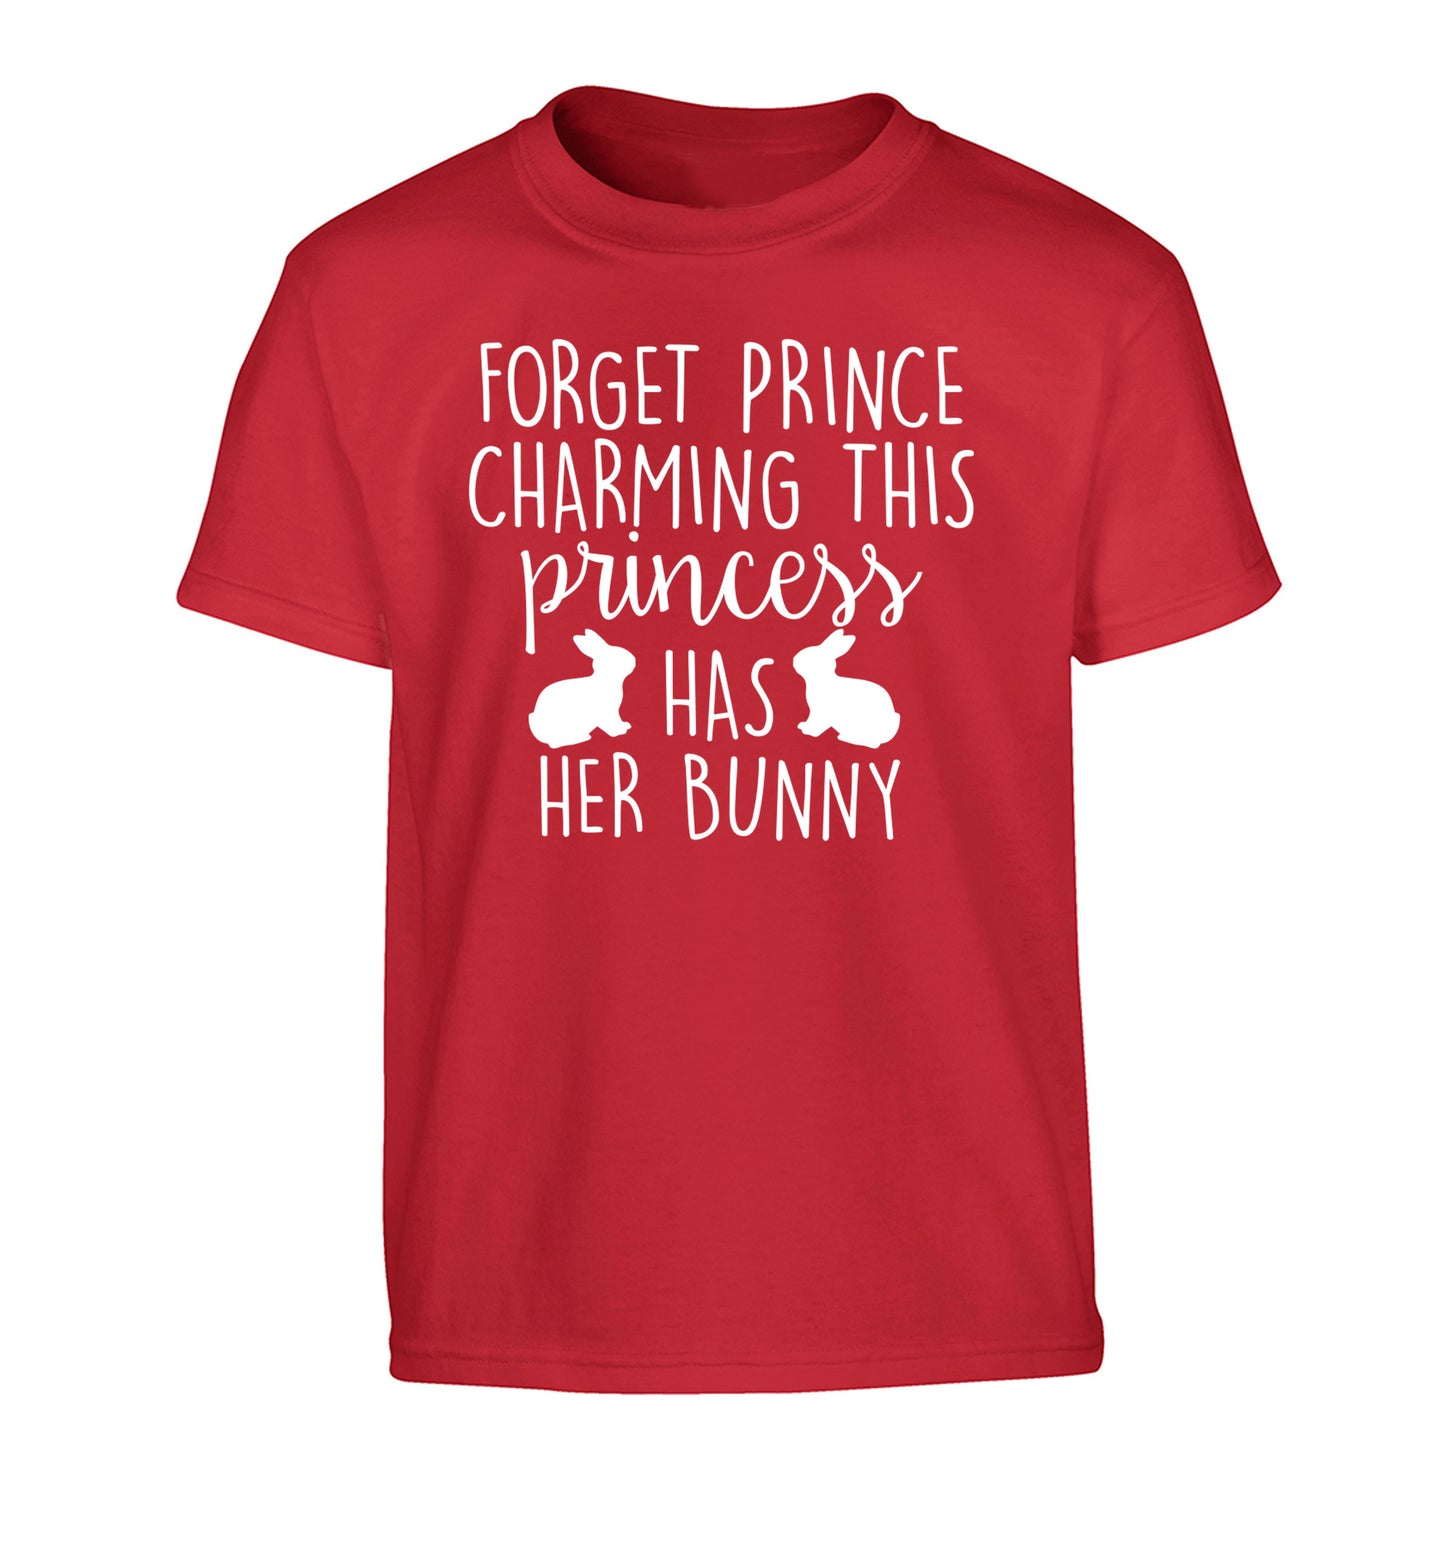 Forget prince charming this princess has her bunny Children's red Tshirt 12-14 Years